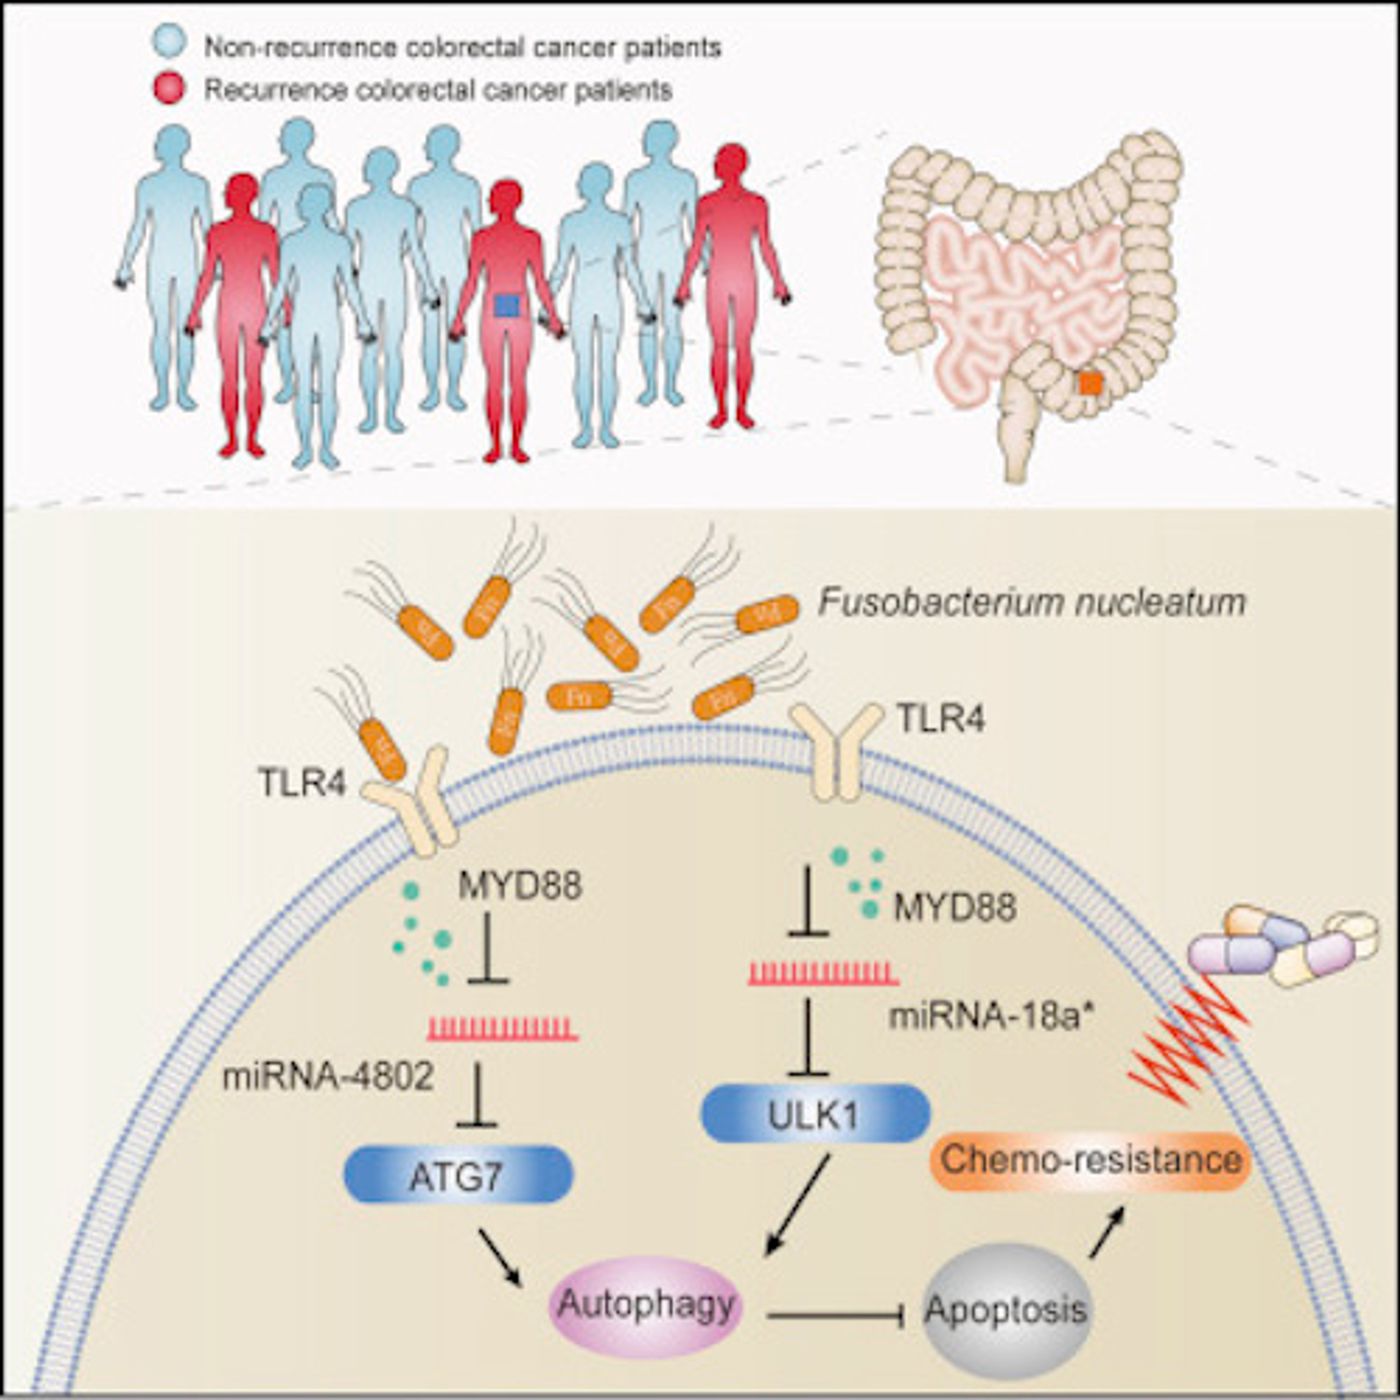 Mechanistically, F. nucleatum targeted TLR4 and MYD88 innate immune signaling and specific microRNAs to activate the autophagy pathway and alter colorectal cancer chemotherapeutic response. / Credit: Cell Yu et al 2017